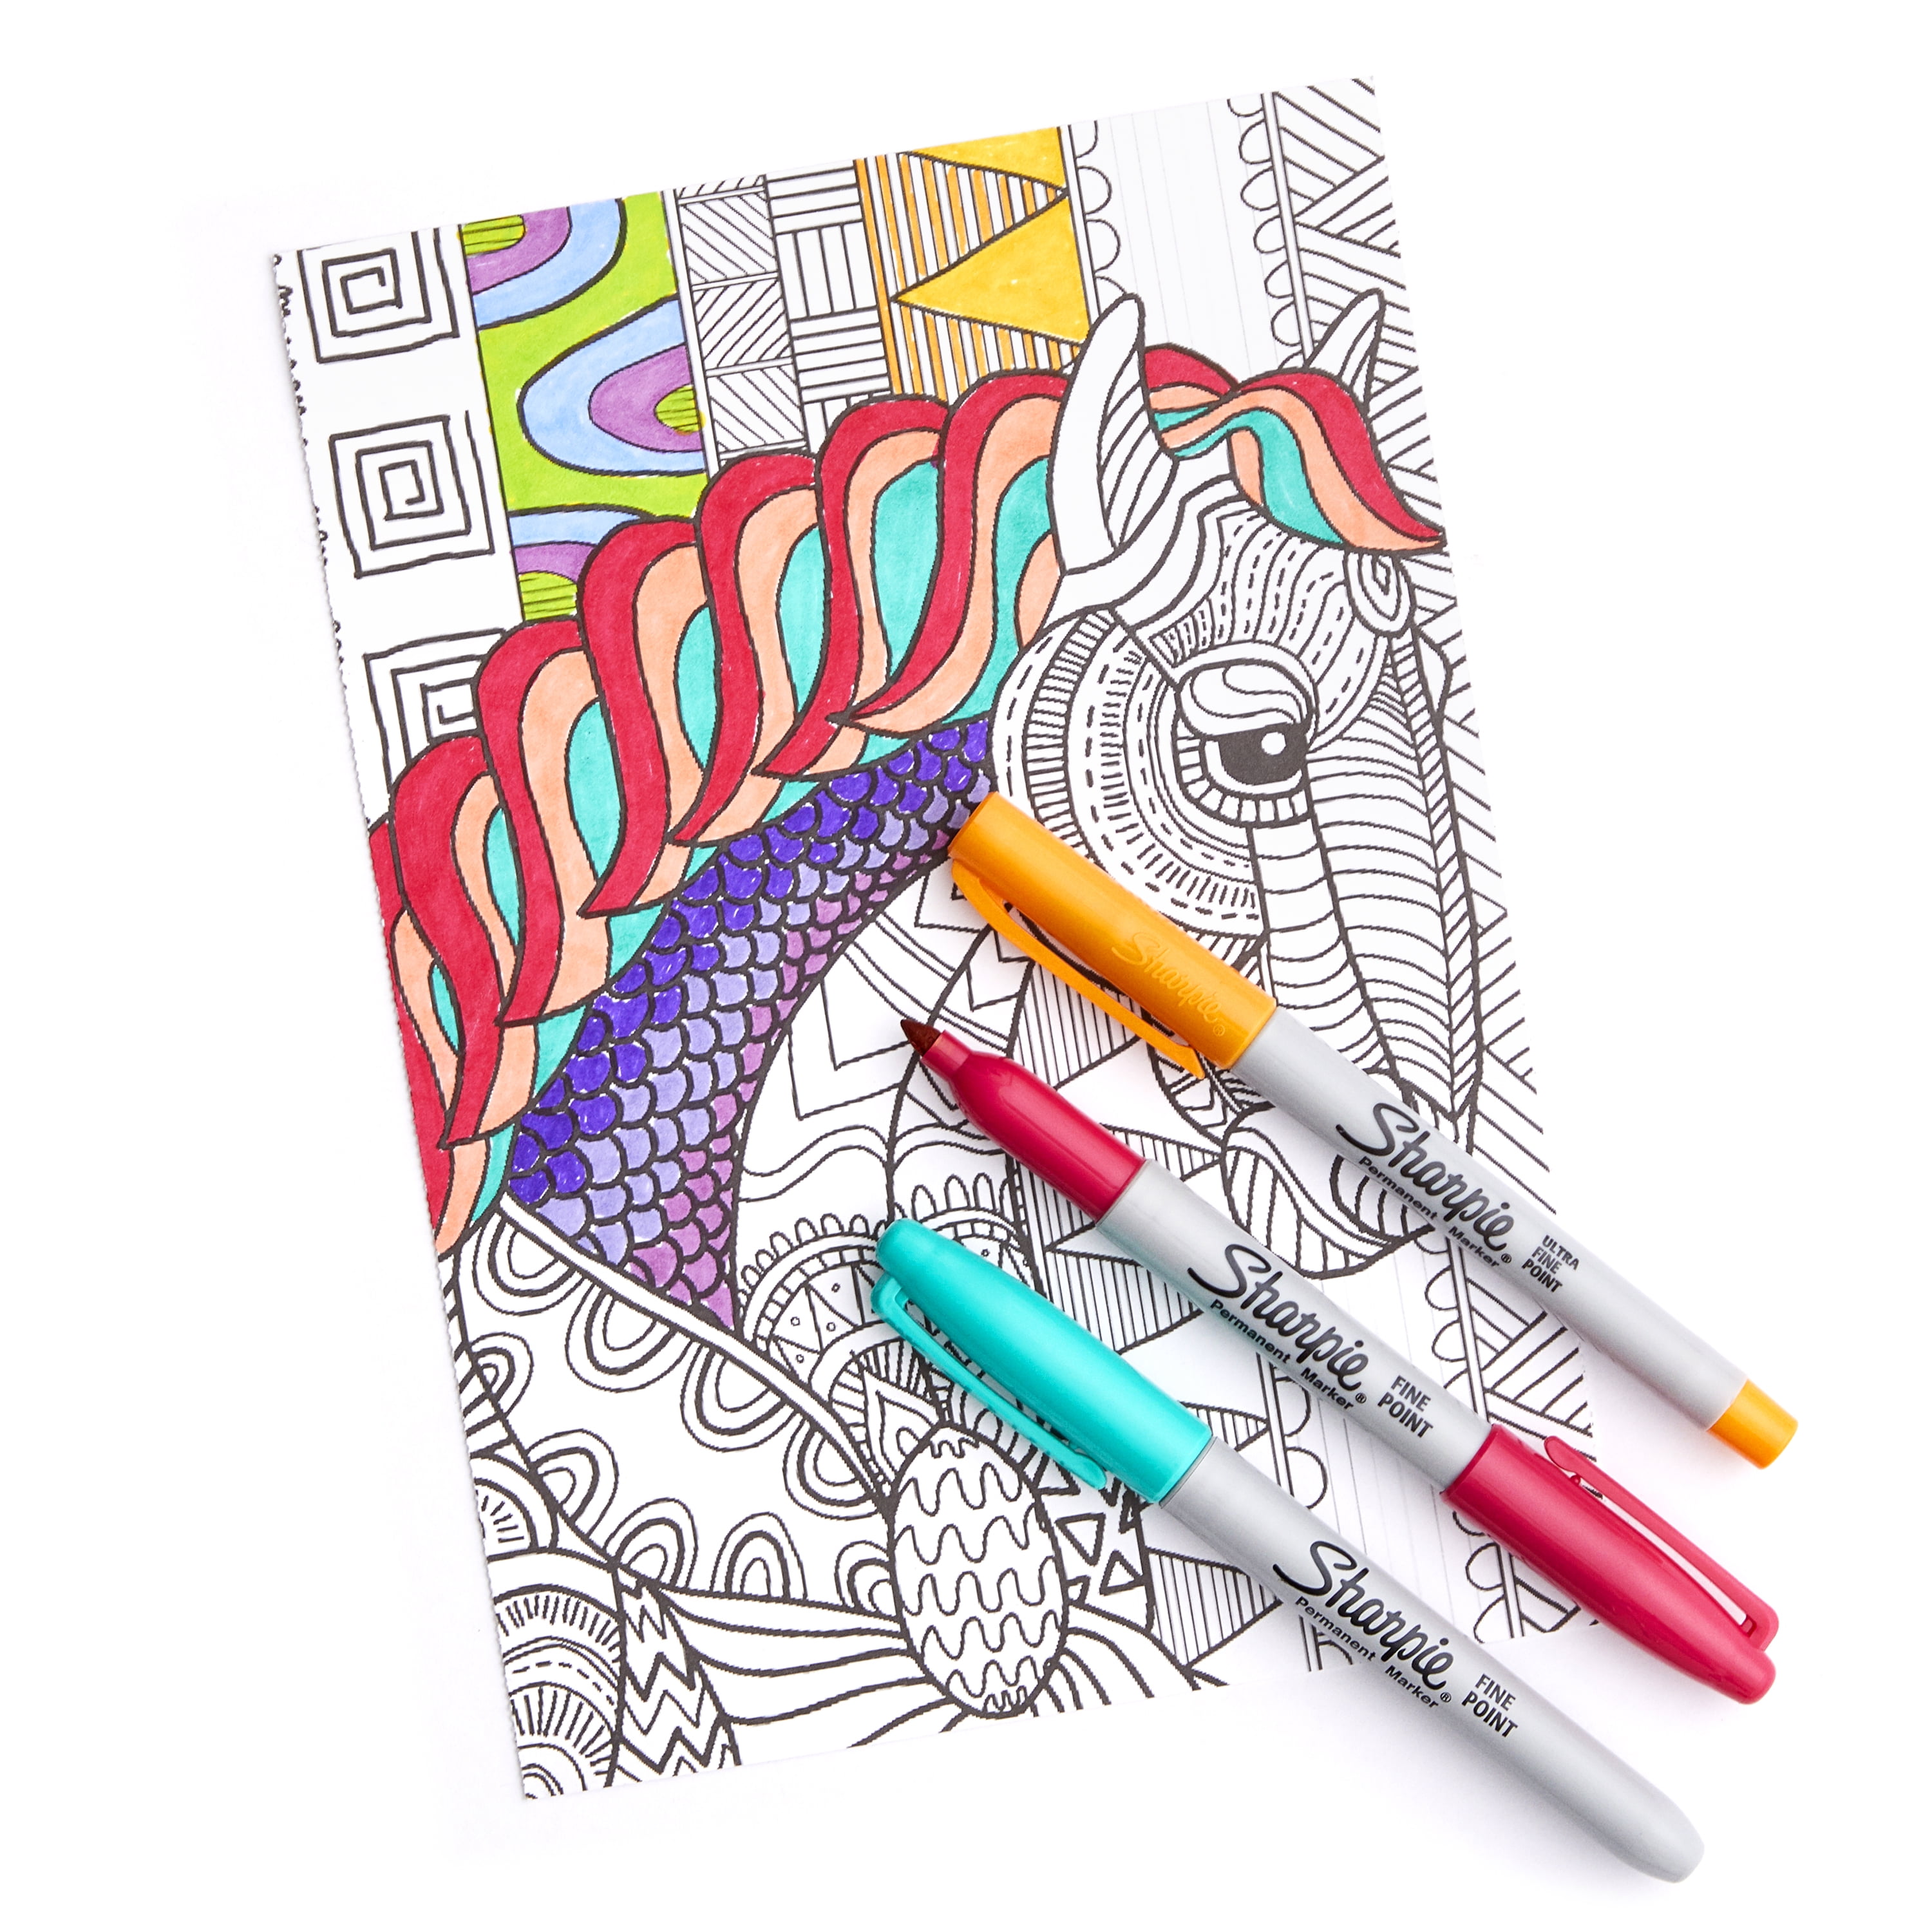 Sharpie Permanent Markers, Limited Edition, Assorted Colors Plus 1 Mystery  Marker, 60 Count $15 (Reg. $40) at Walmart